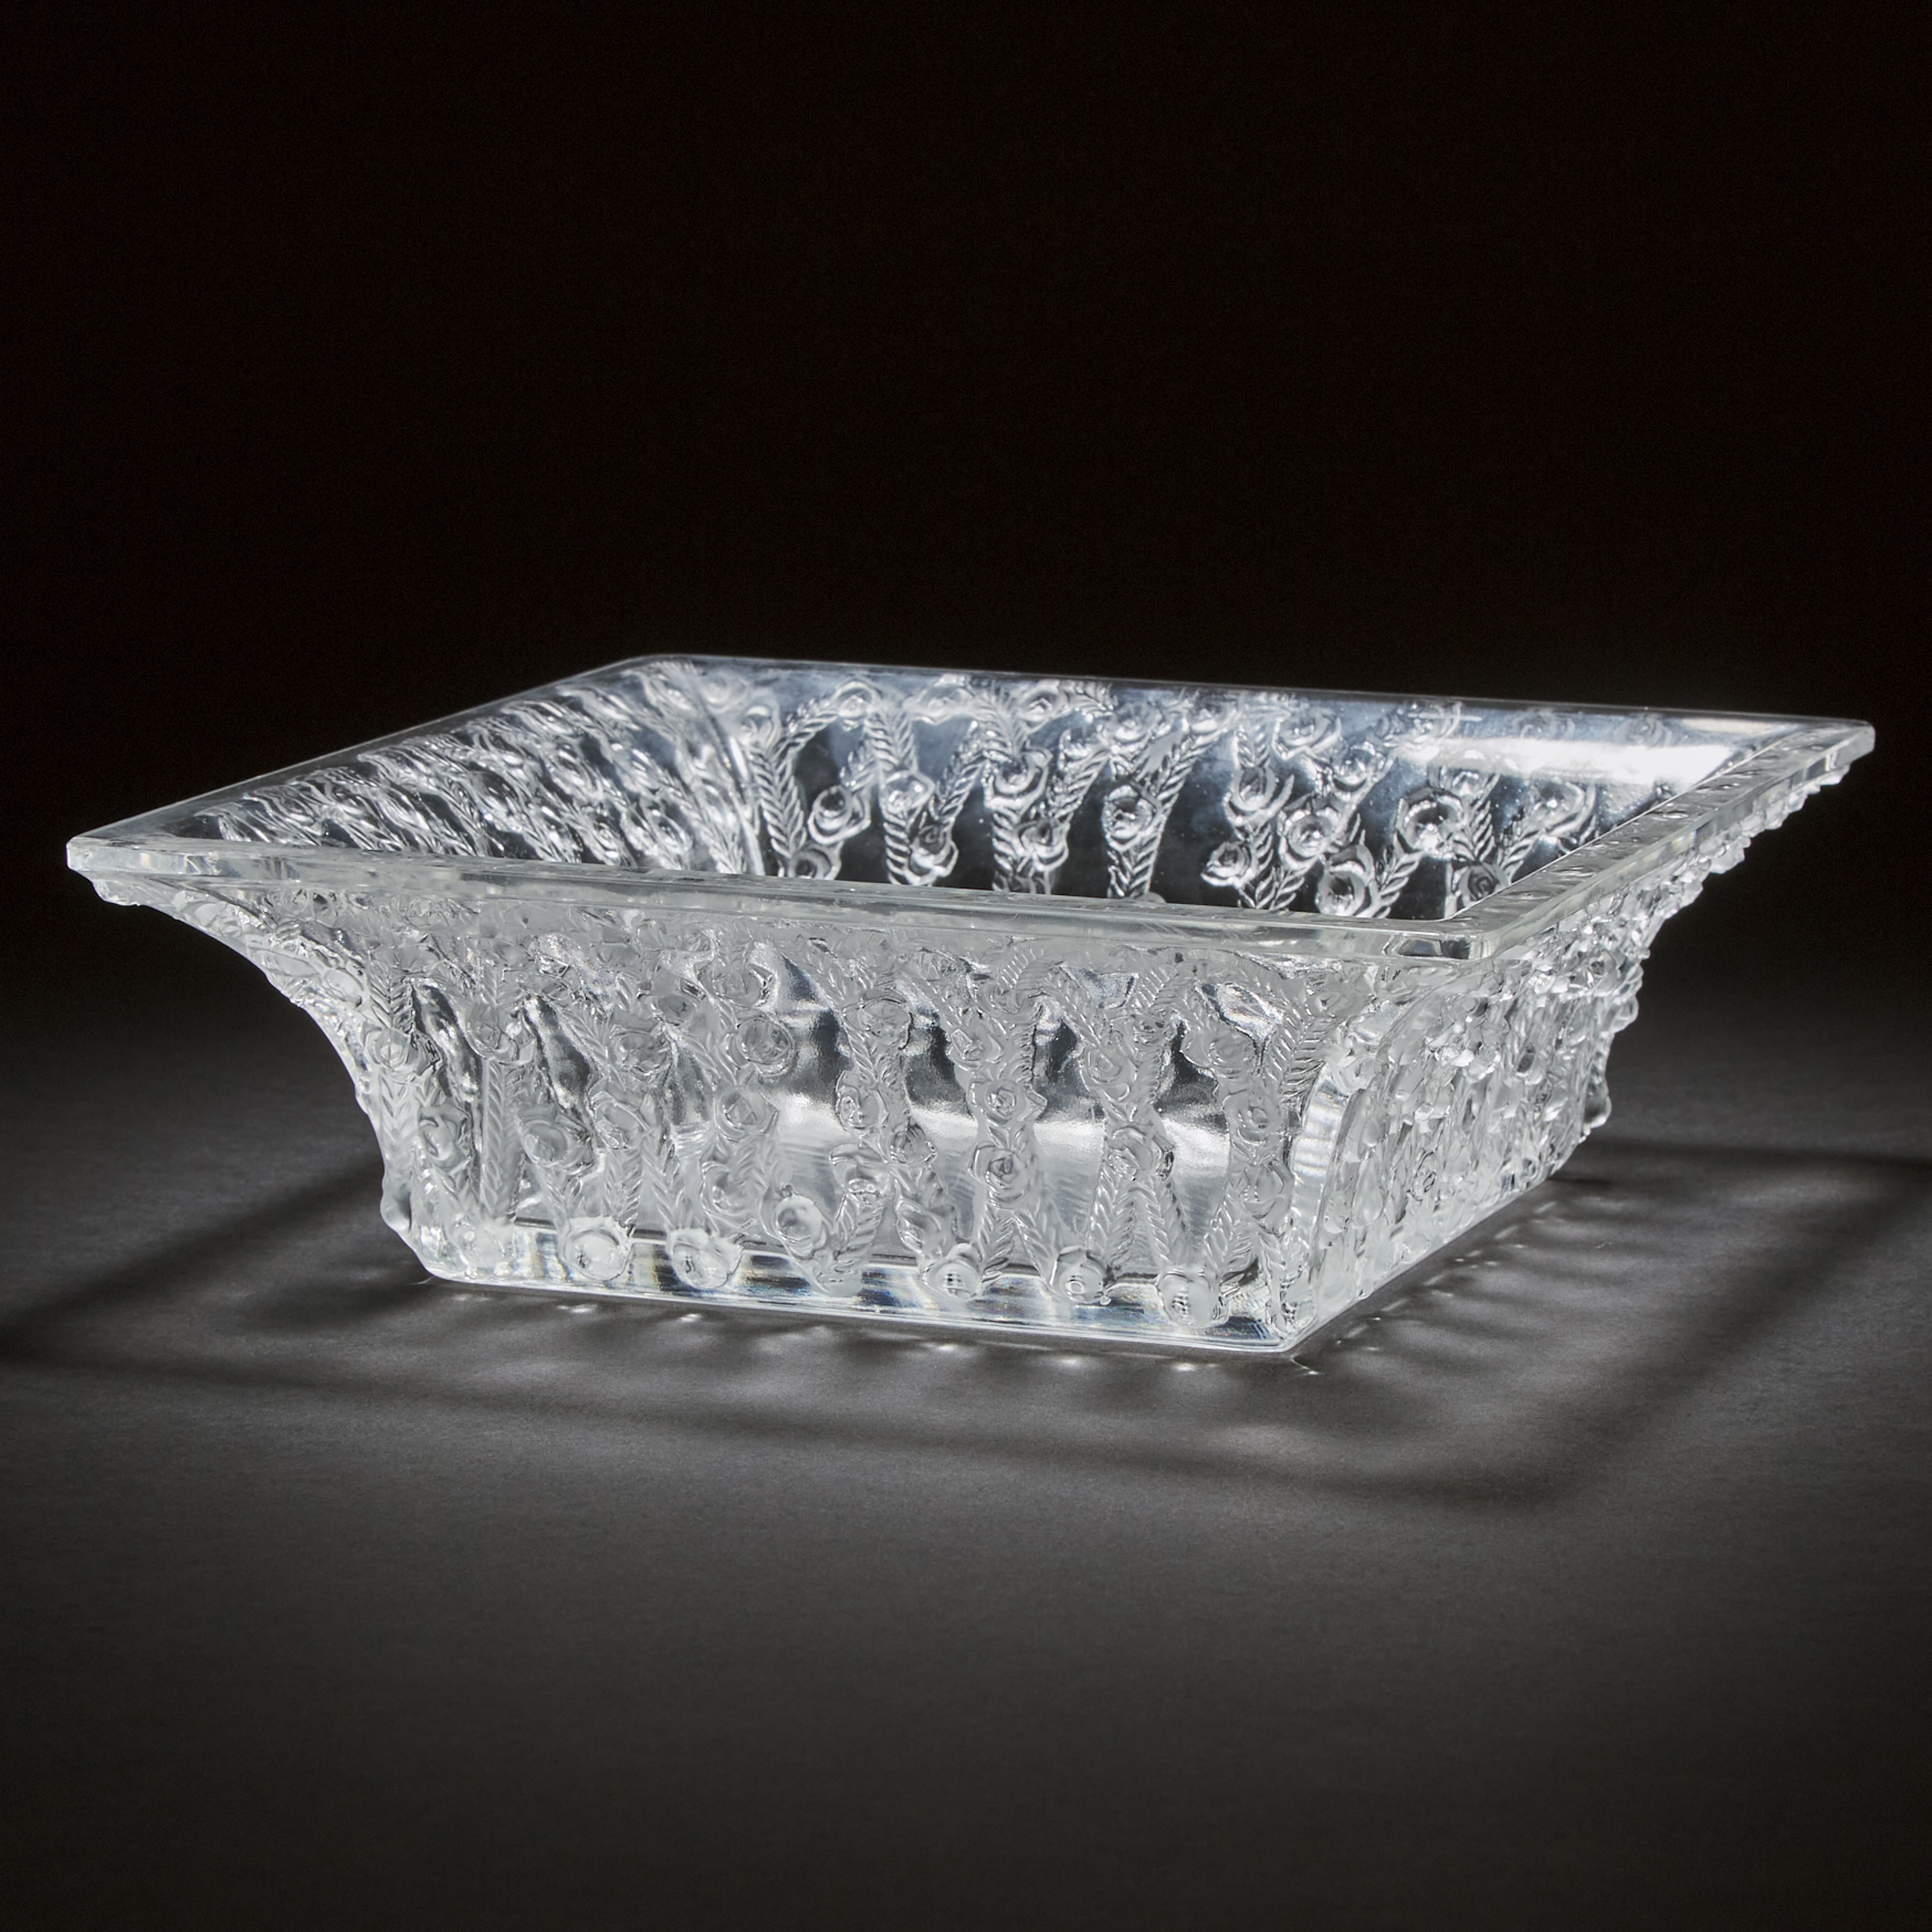 'Roses', Lalique Moulded and Partly Frosted Glass Bowl, post-1945